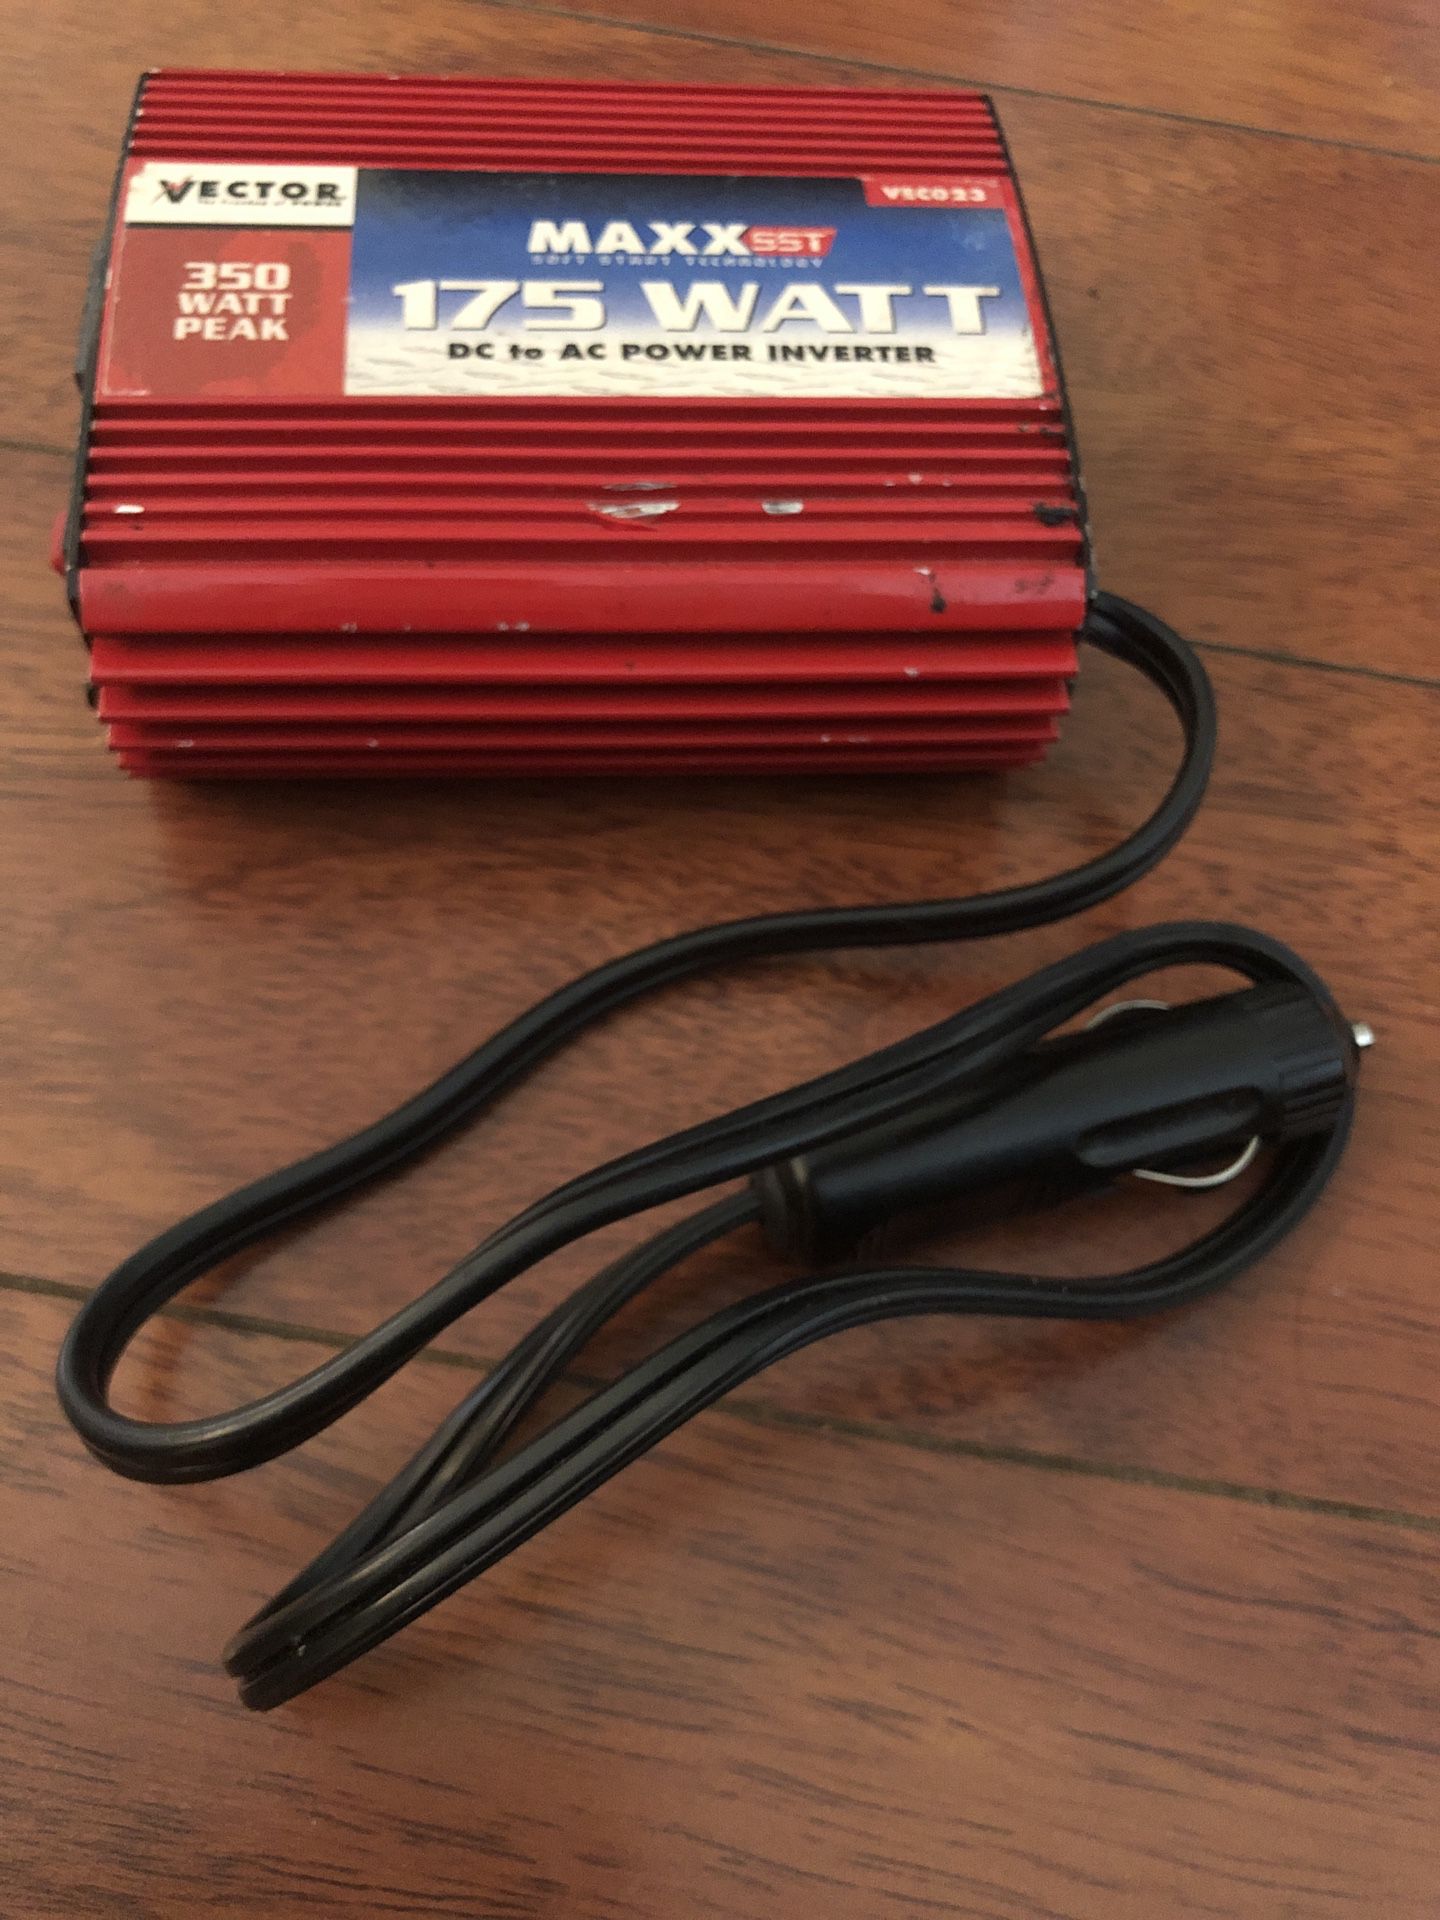 175 W DC to AC power inverter - Plugs into car lighter for standard two or three prong plugs